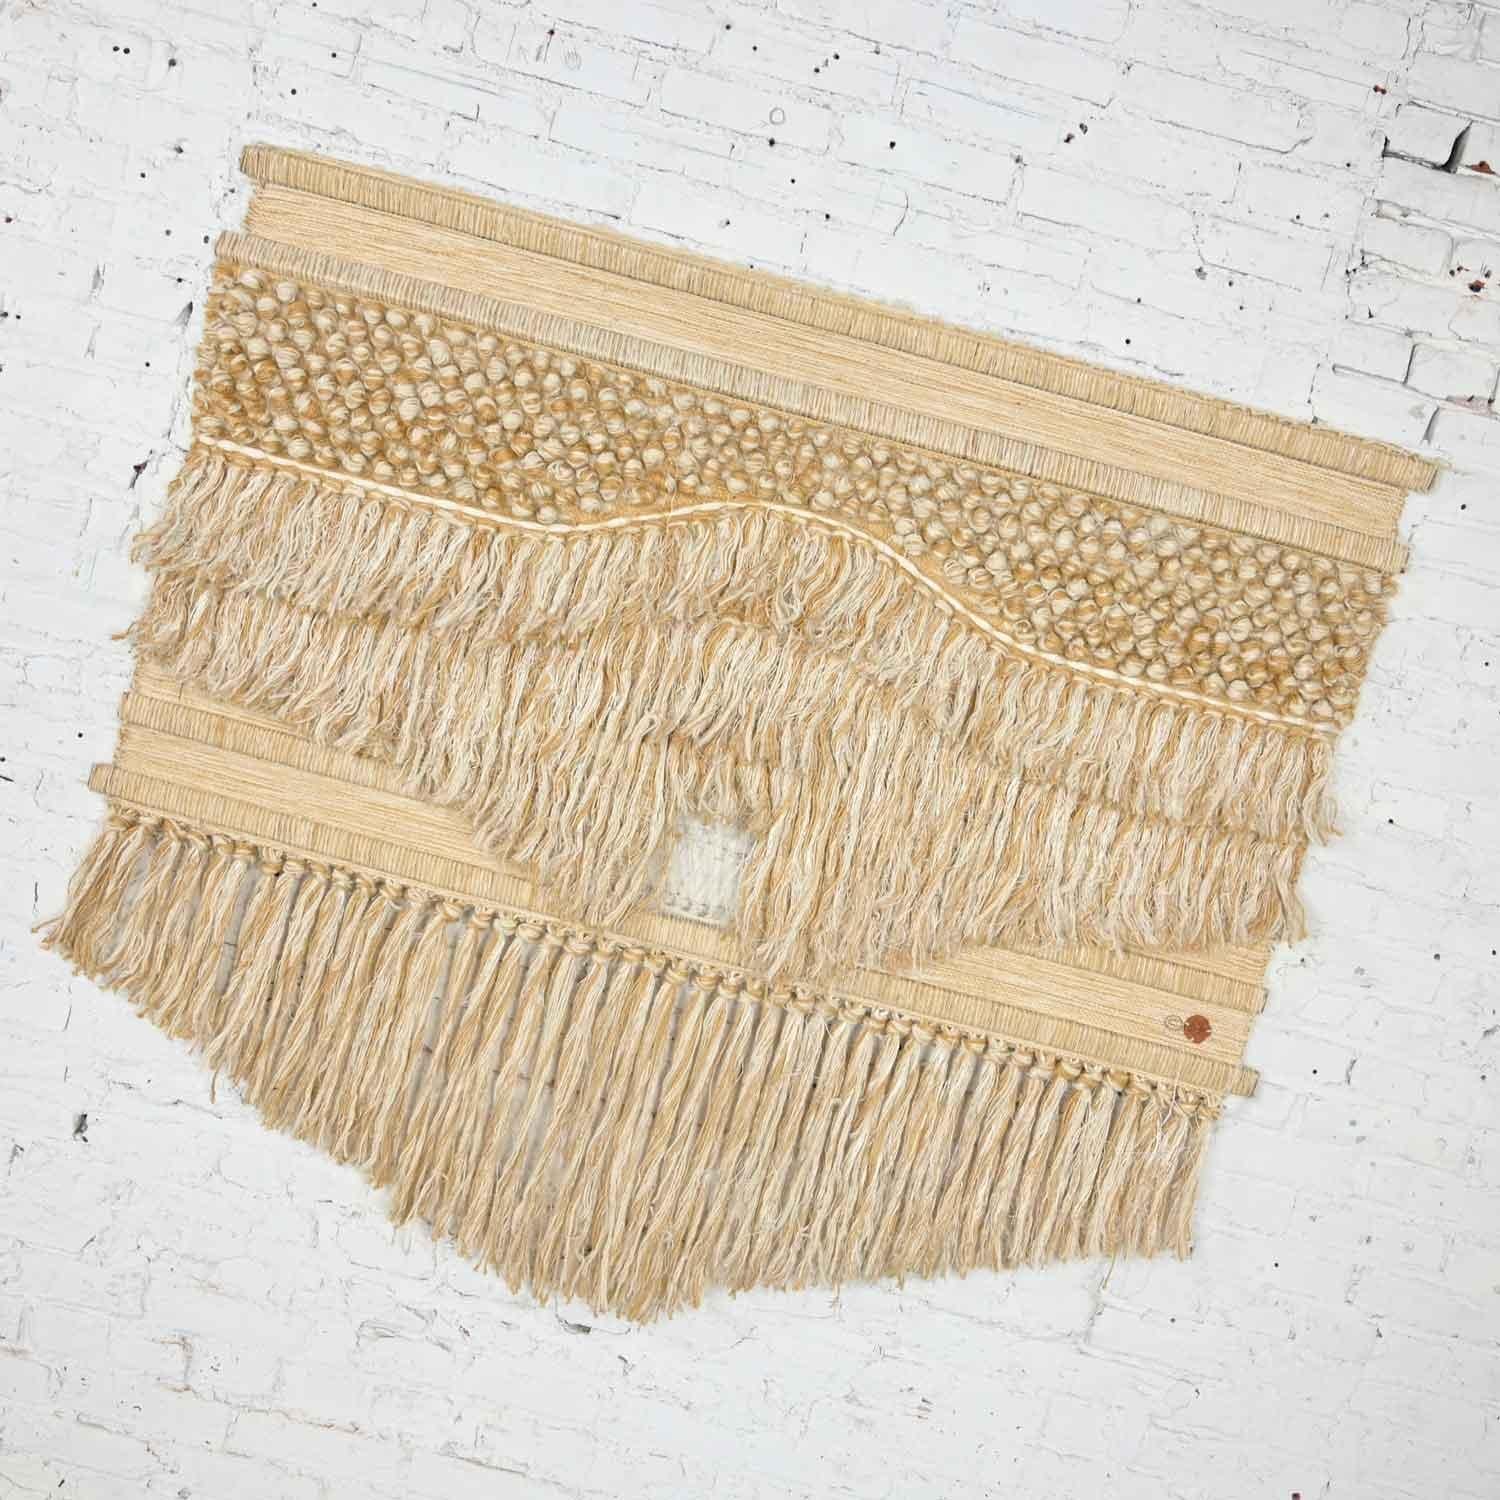 Fabulous modern textile woven wall hanging designed by Don Freedman c/o Tree Time for Interlude Inc. Comprised of jute, art silk, wood, wool, and cotton. Beautiful condition, keeping in mind that this is vintage and not new so will have signs of use